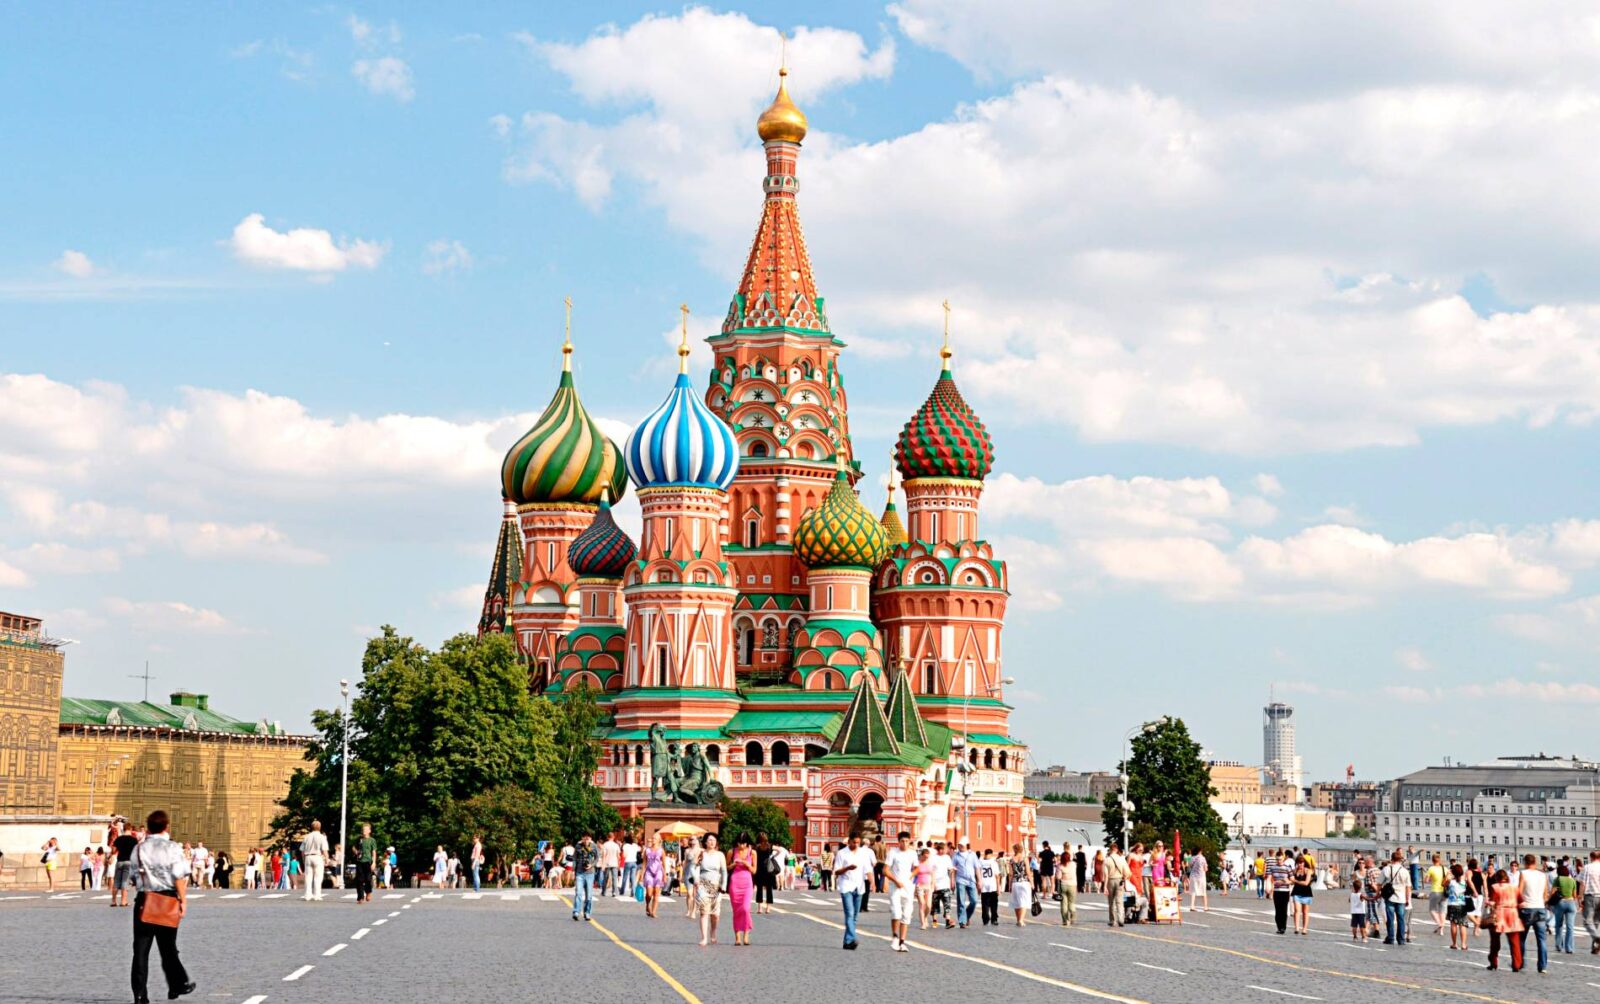 St. Basil’s Cathedral on Red Square in Moscow, Russia